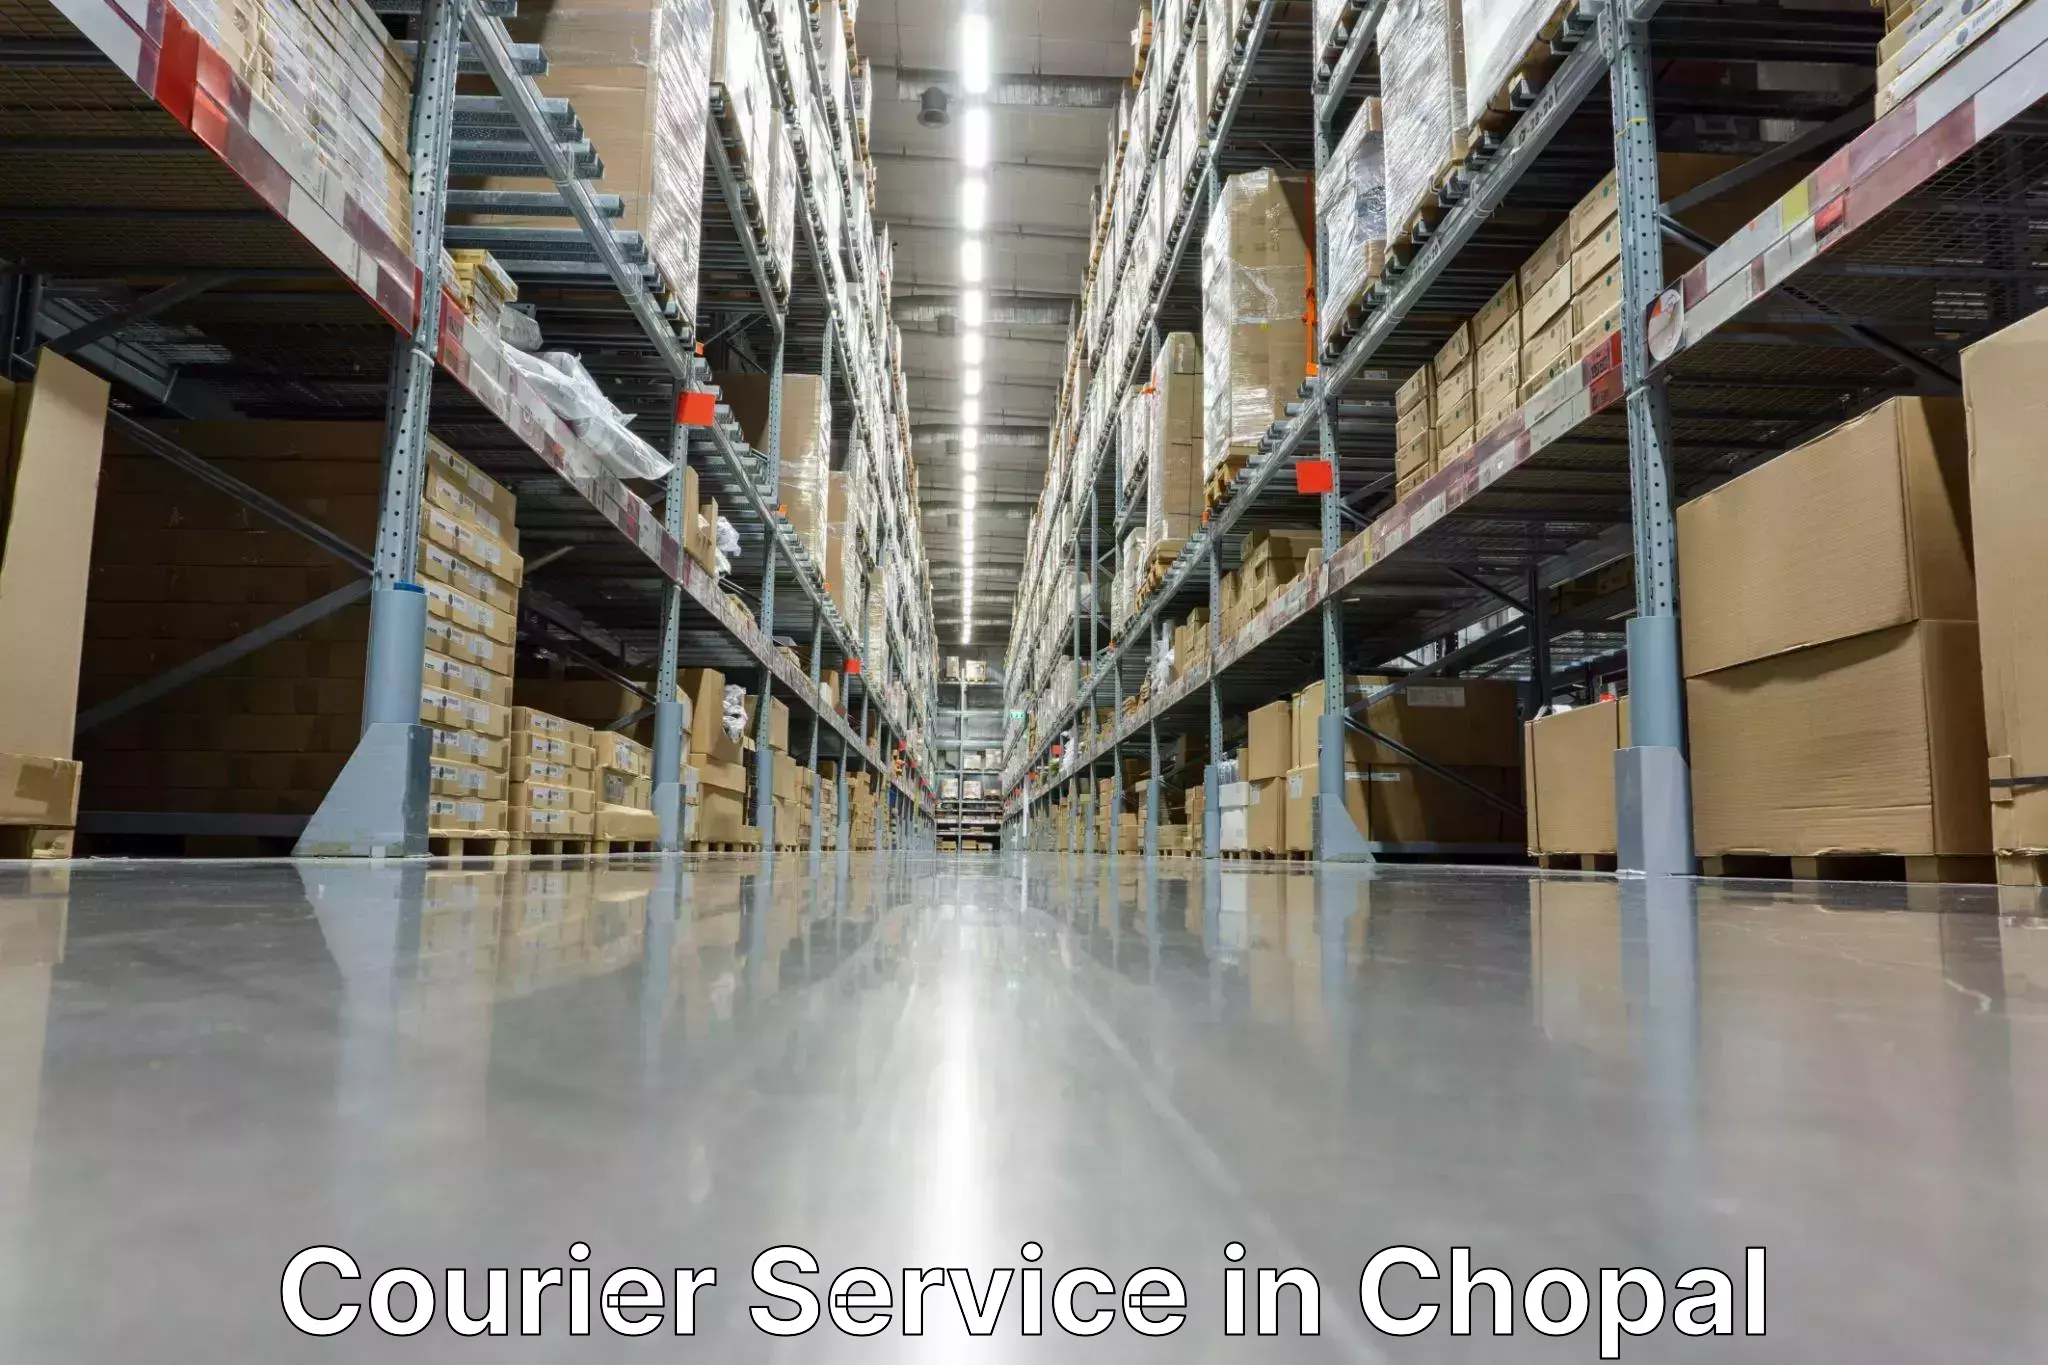 Automated shipping processes in Chopal